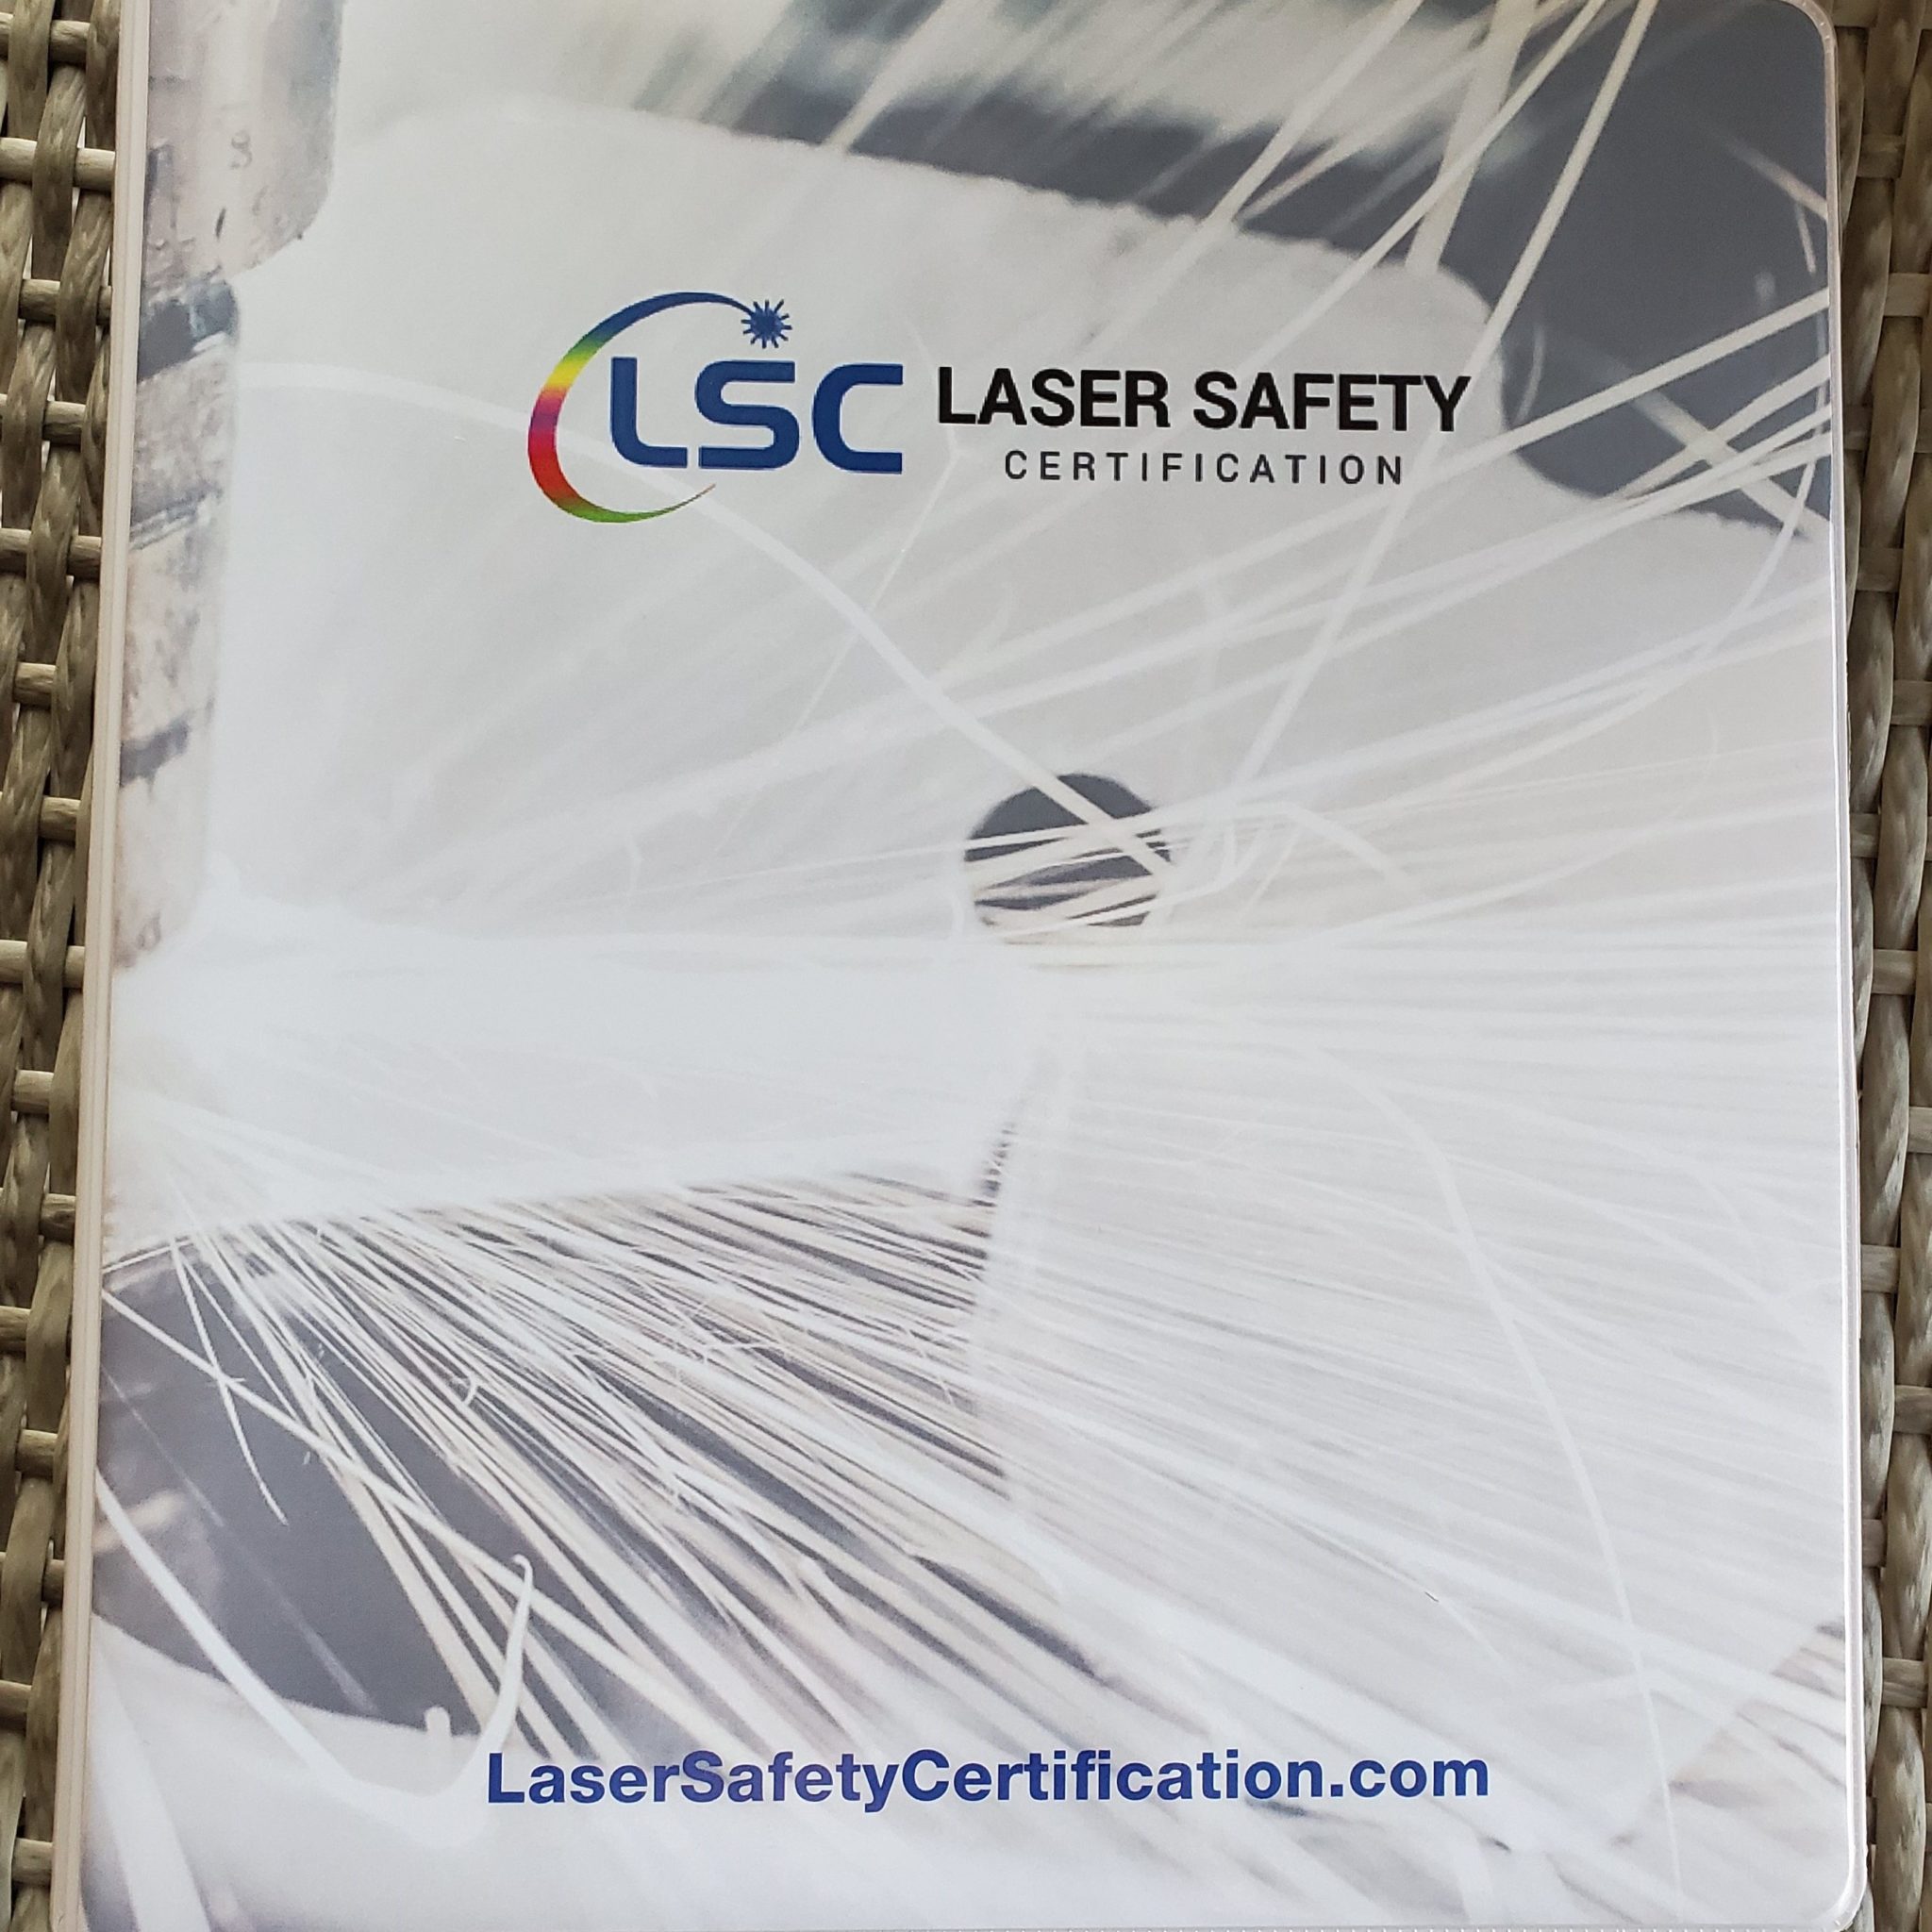 Why You Need the Laser Safety Officer Kit Laser Safety Certification